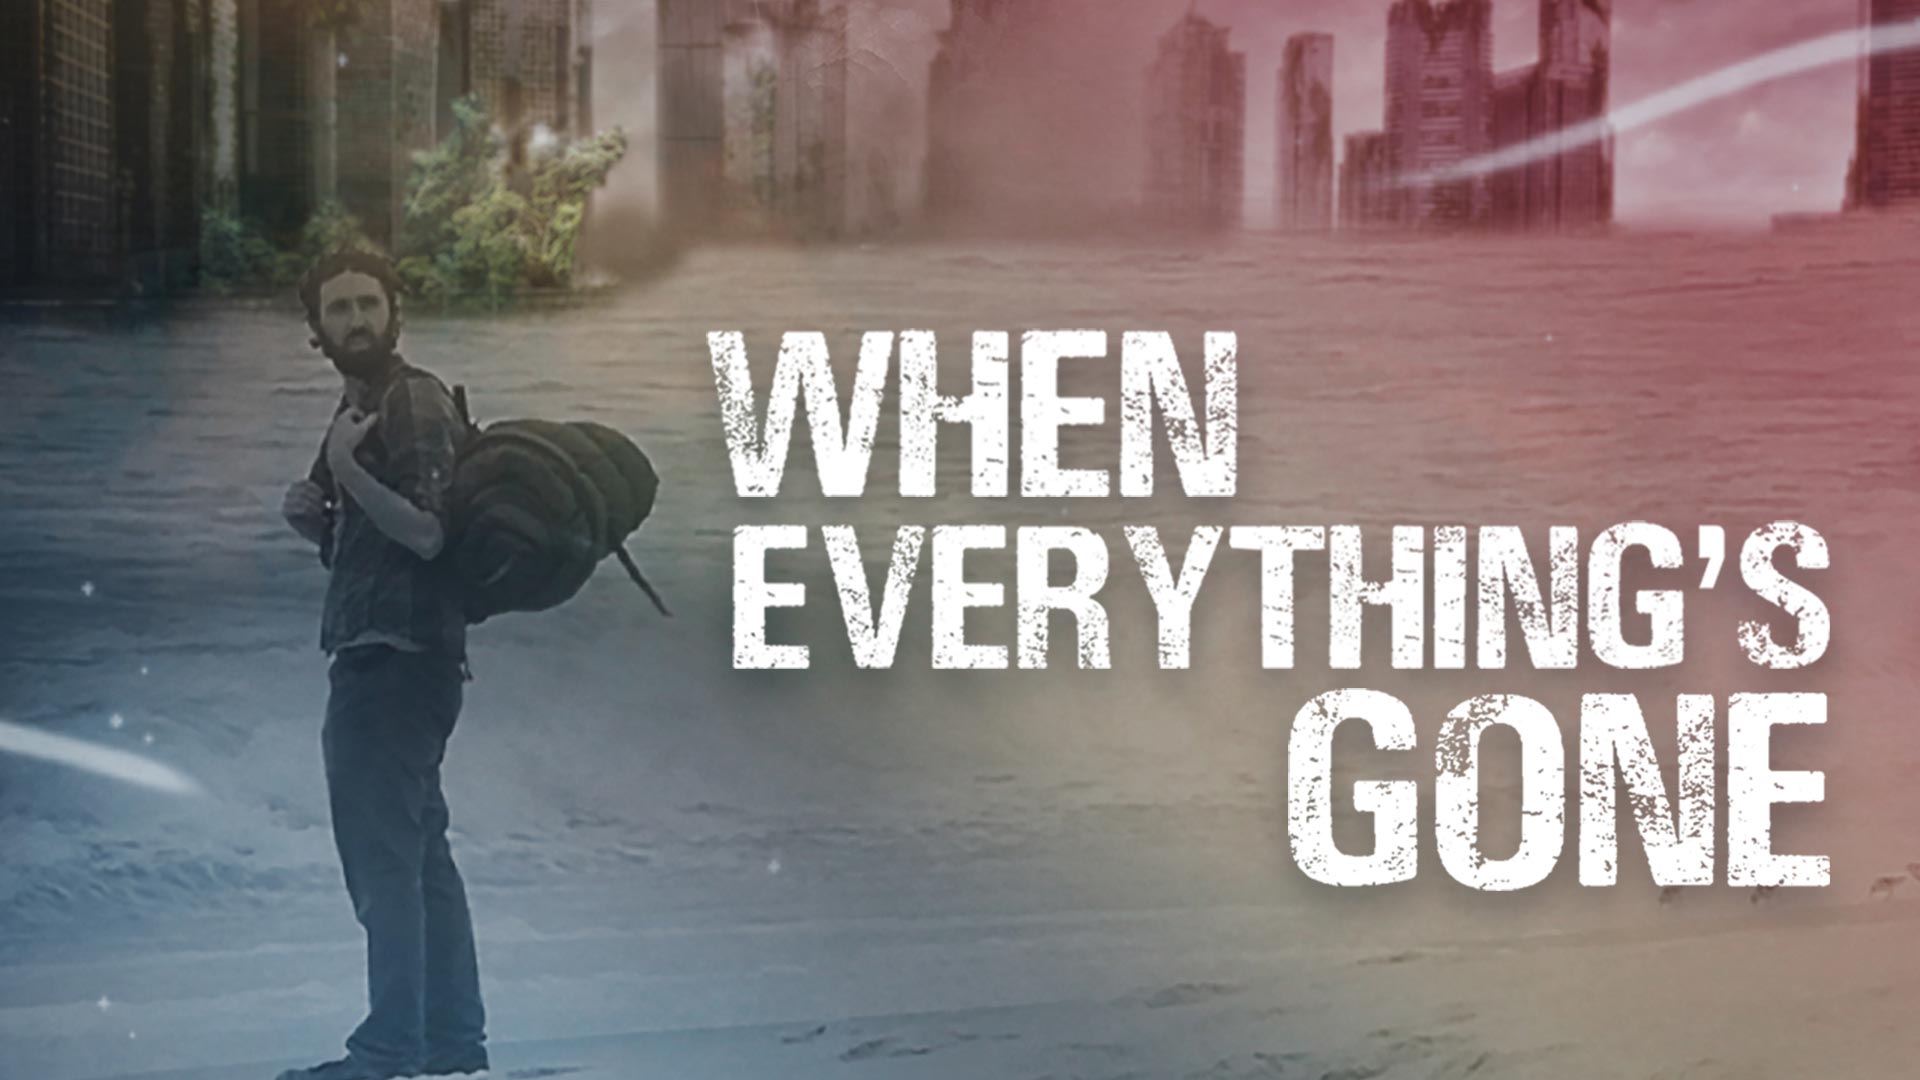 When Everything's Gone | Trailer | Watch Movie Free @FlixHouse